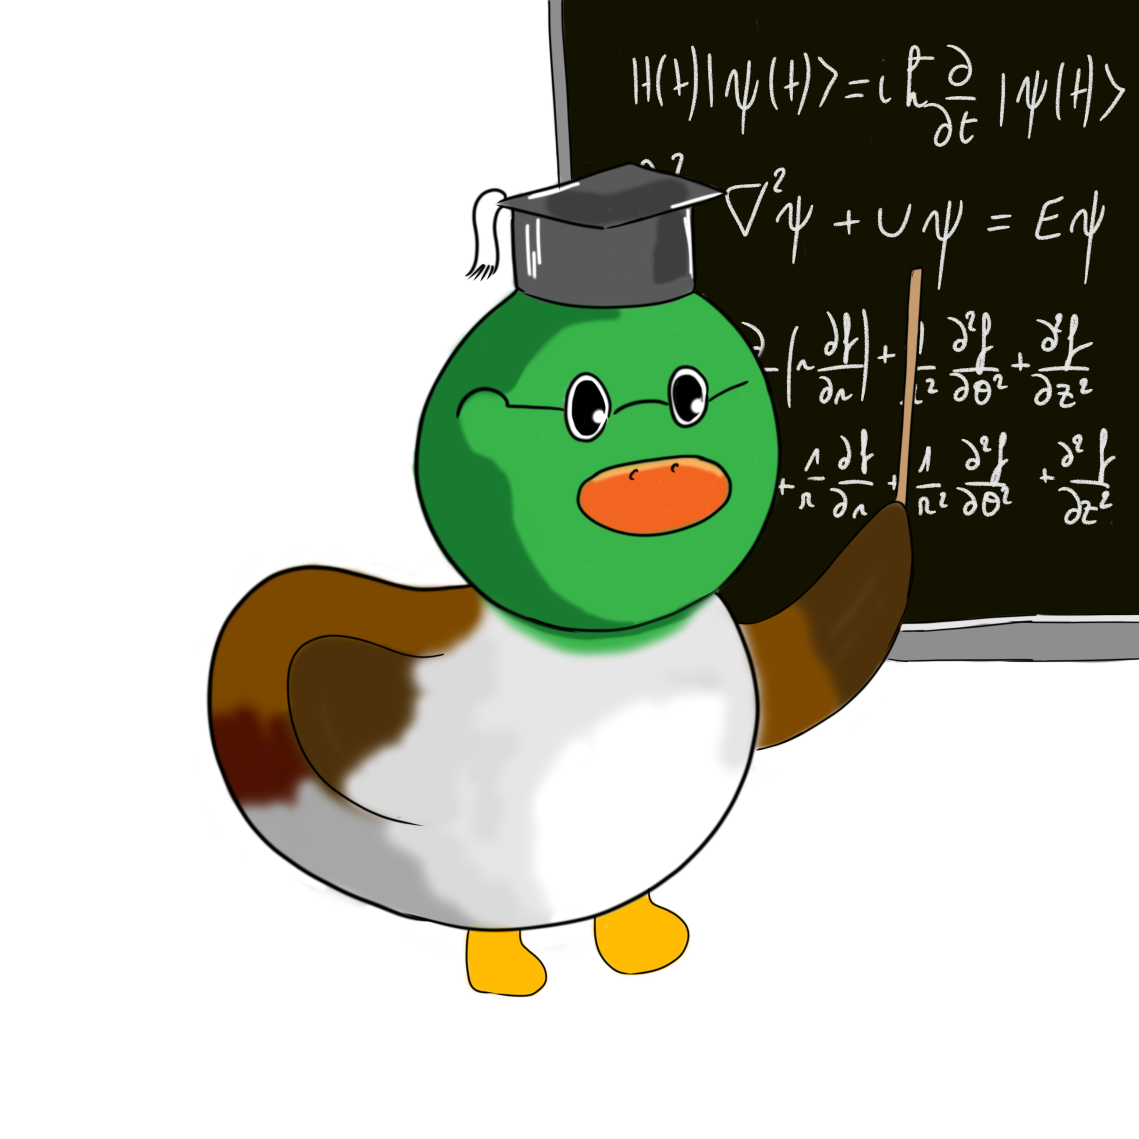 The 404 duck